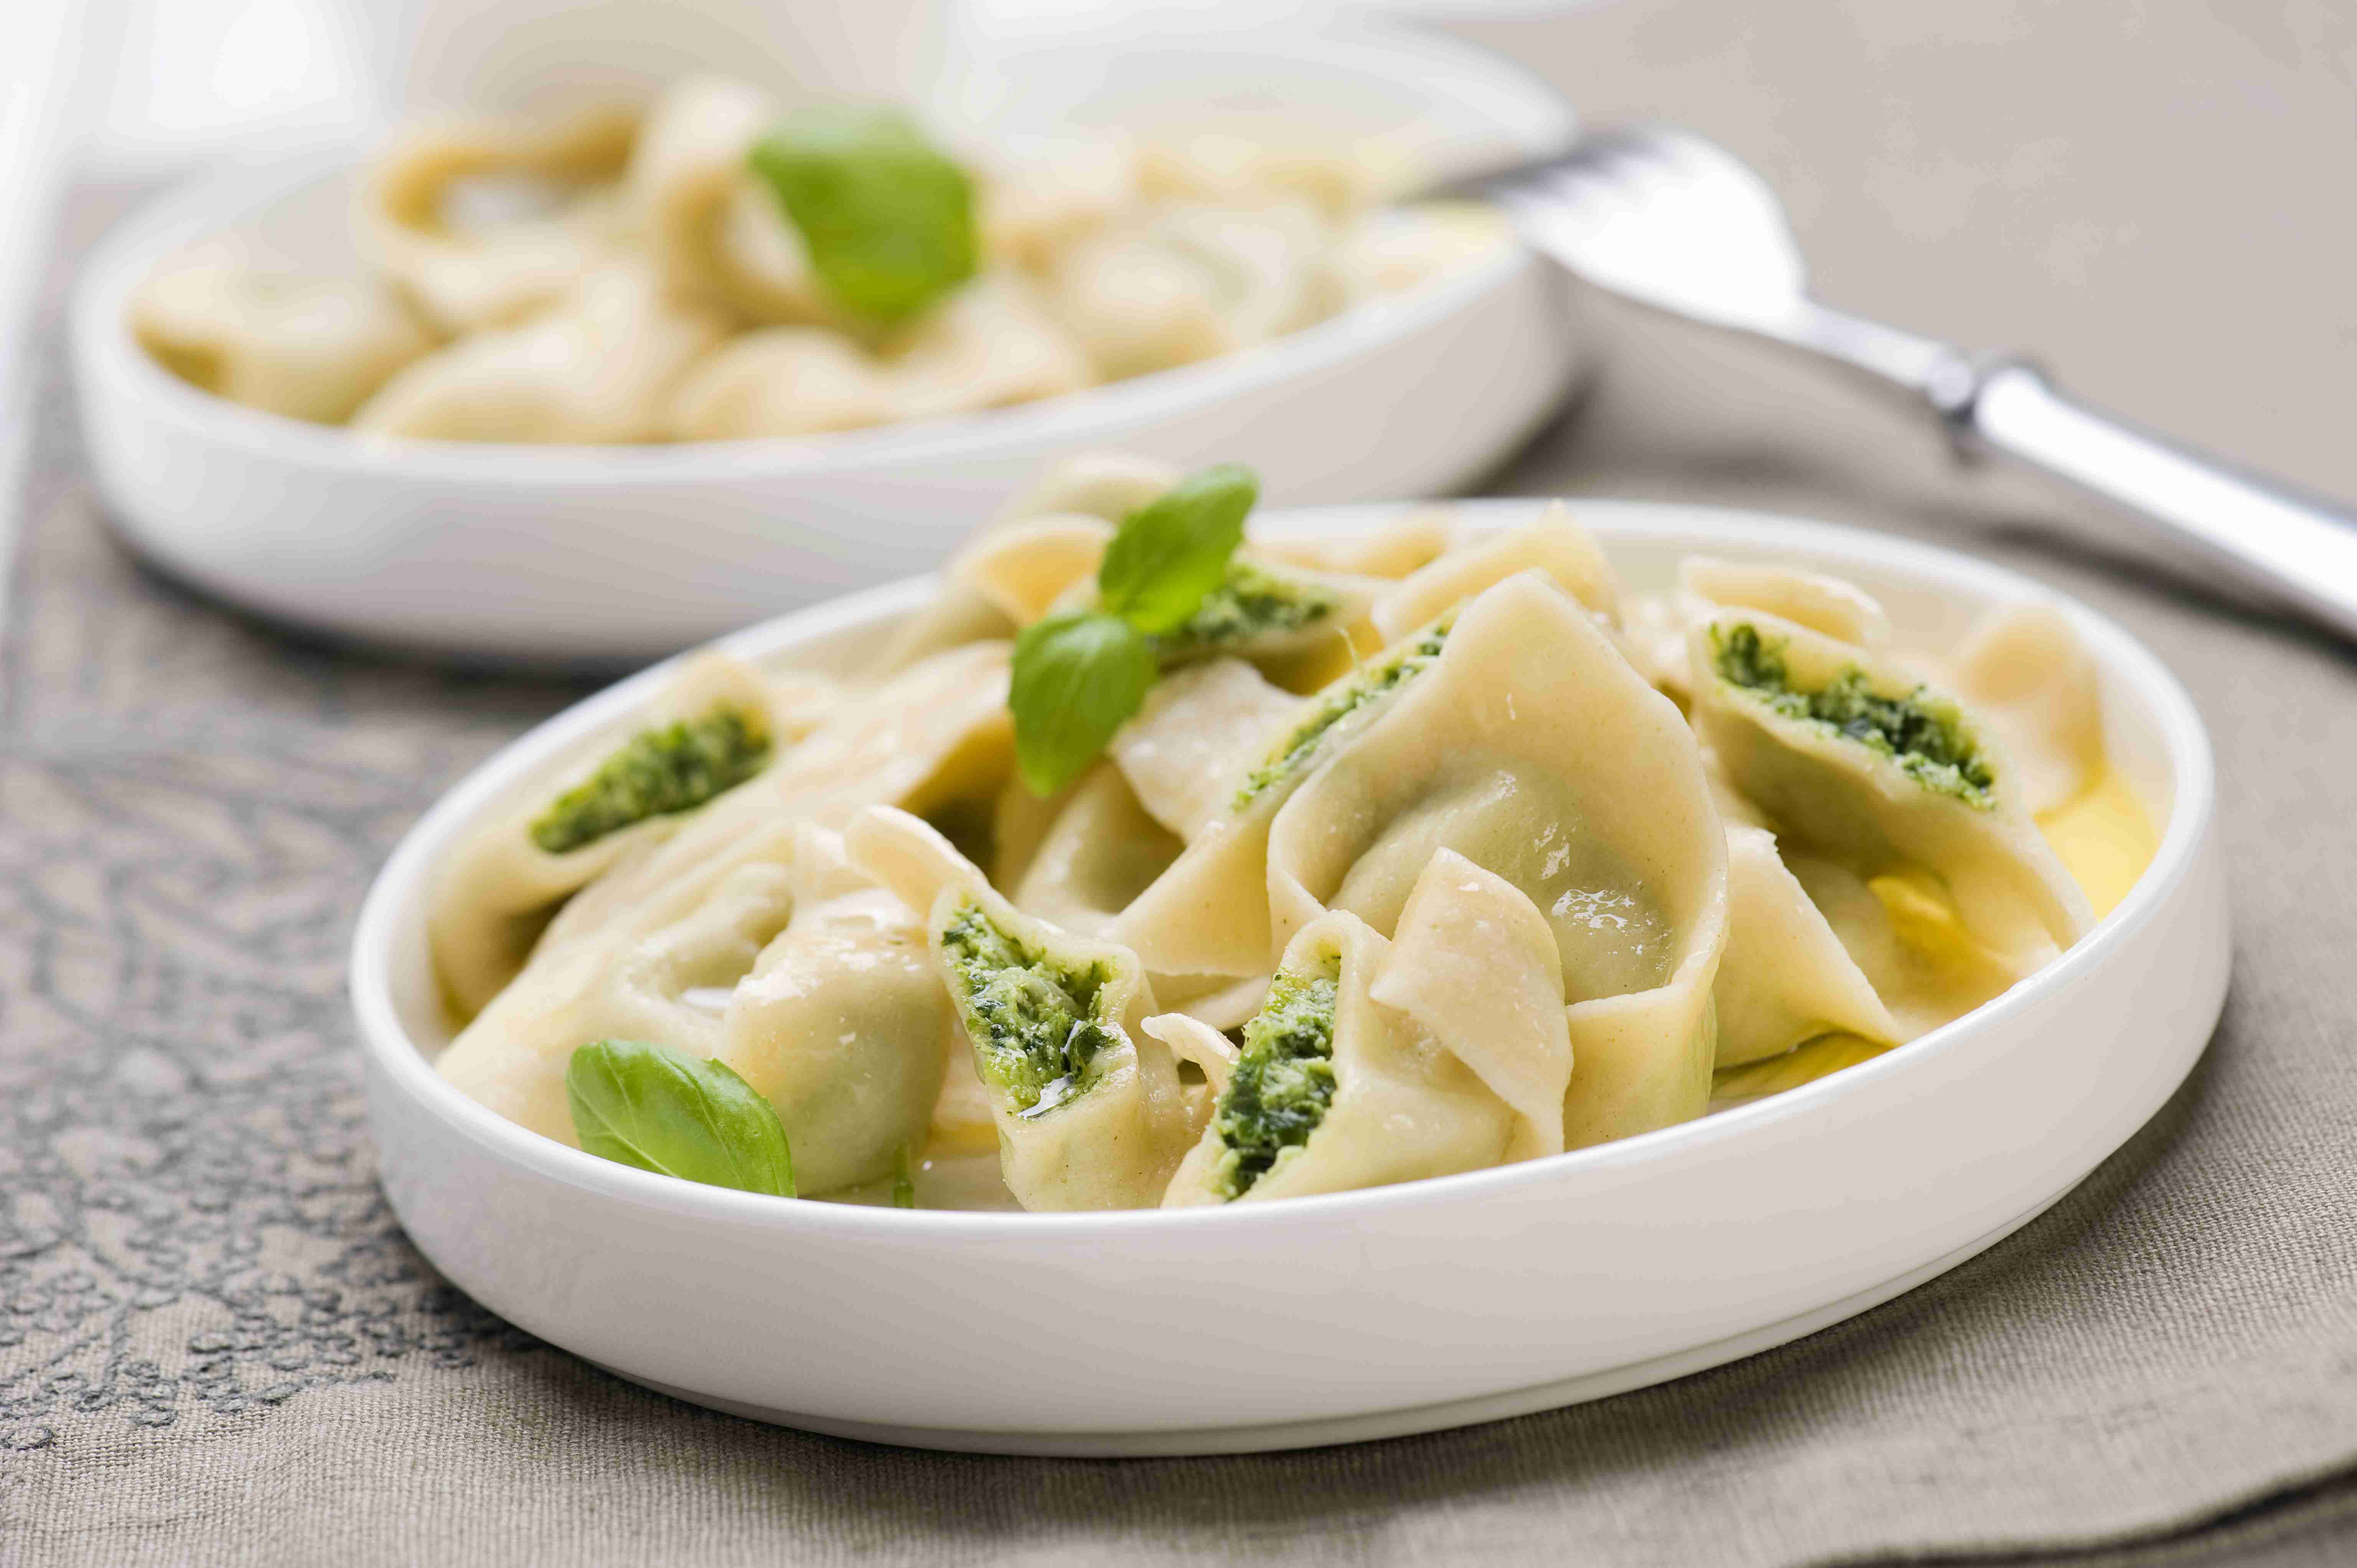 Tortelloni with spinach and ricotta